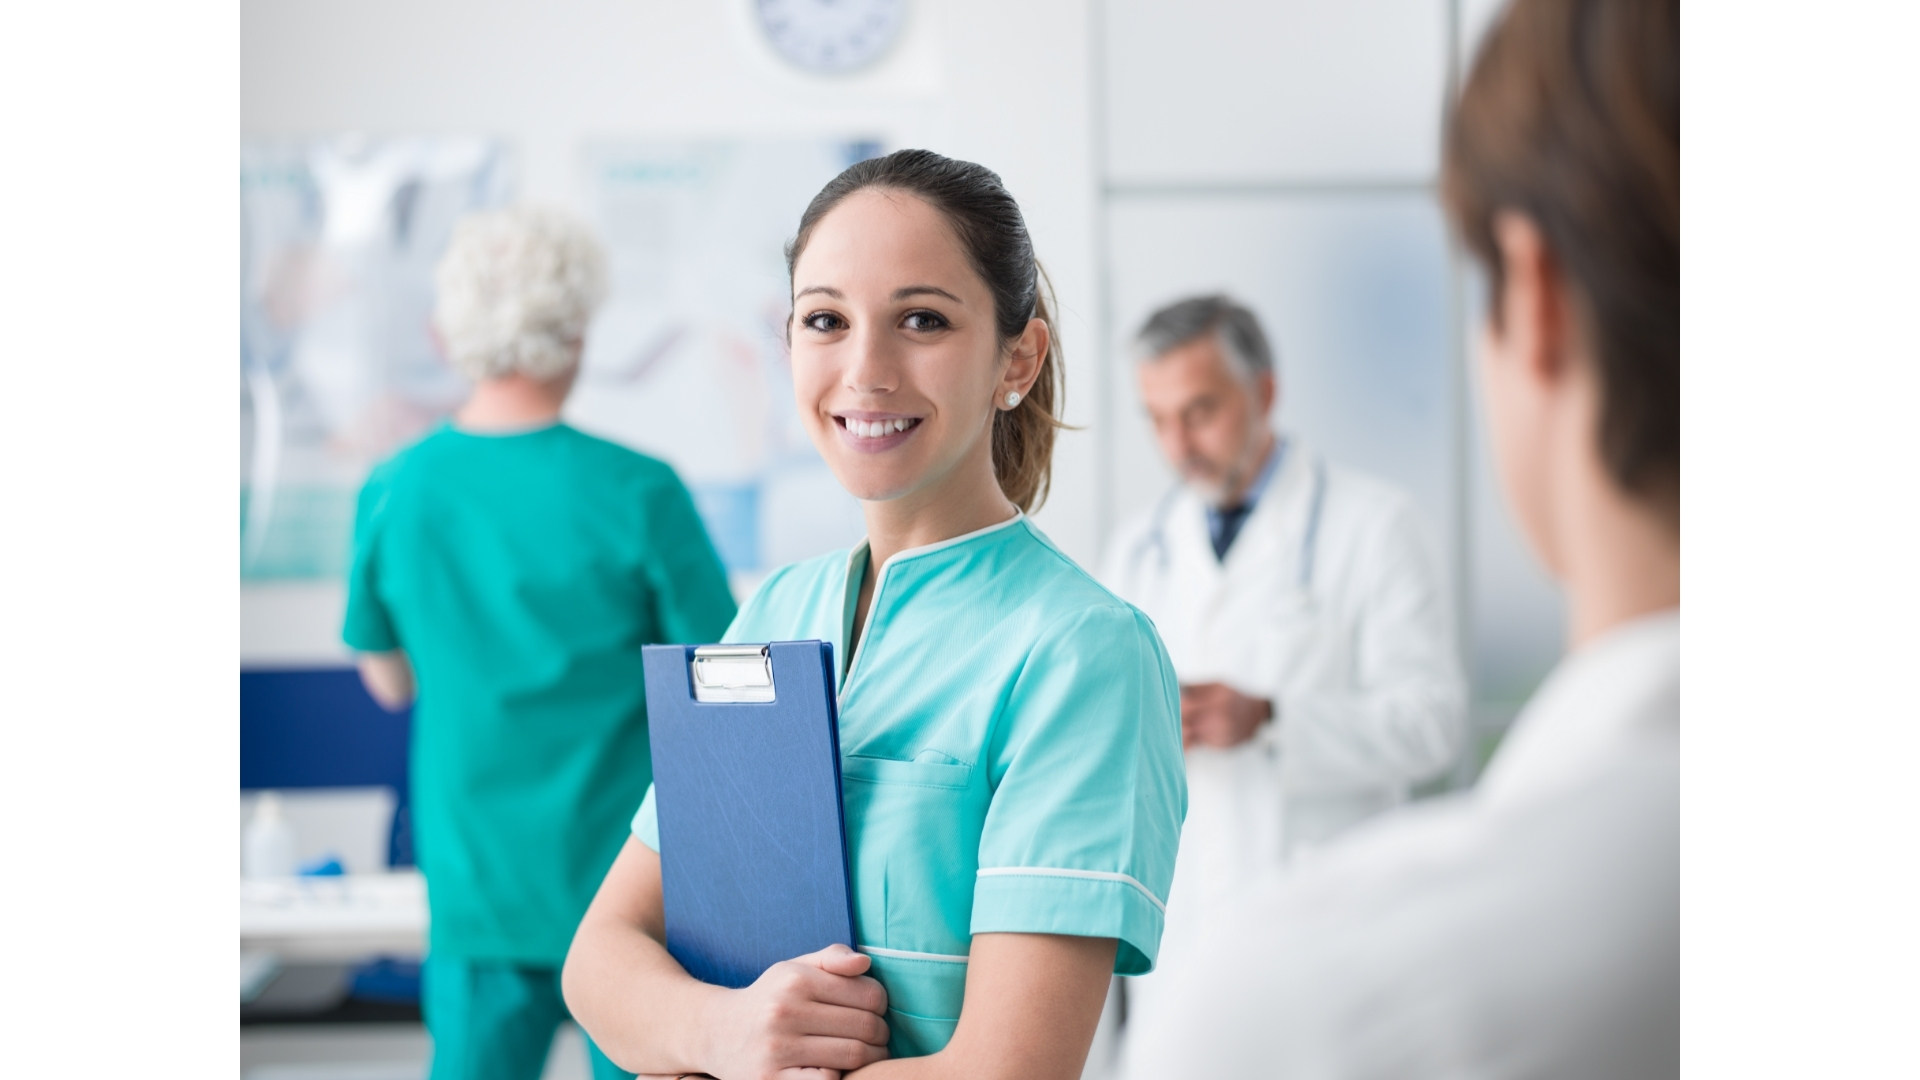 Young woman in medical scrubs holding a clipboard